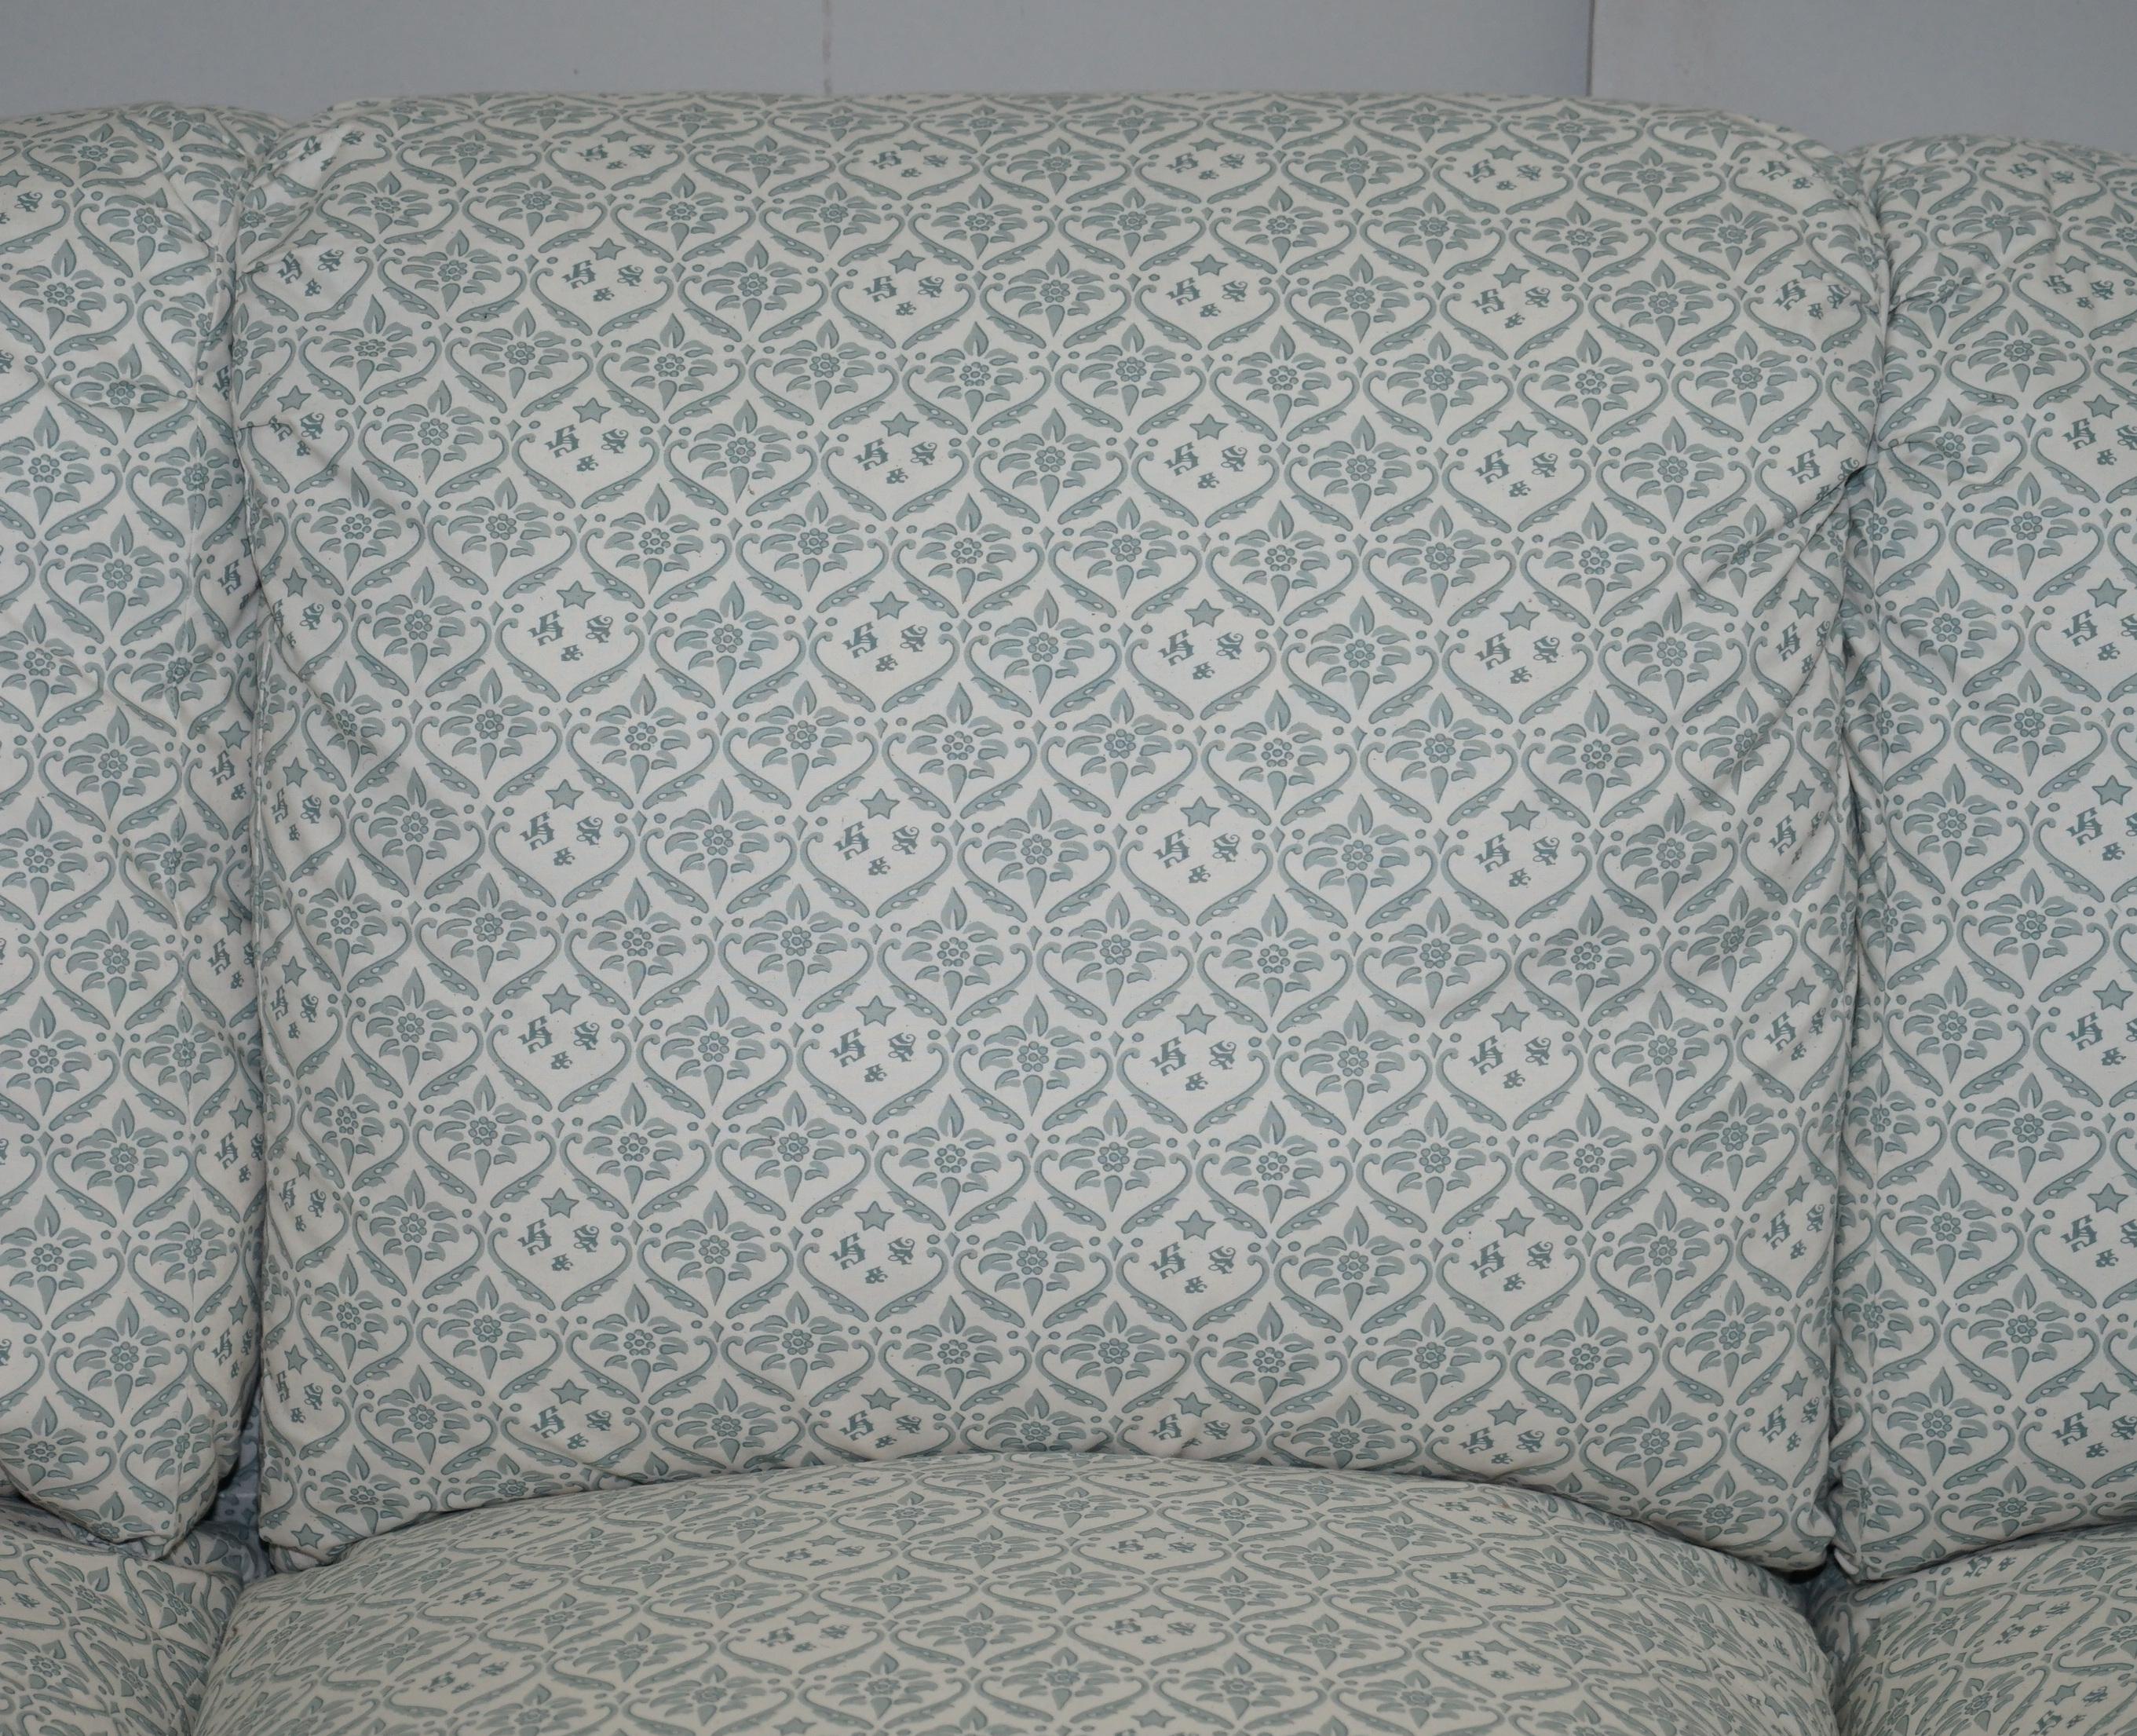 Upholstery 1 of 2 Howard & Sons Fully Stamped Sofa Feather Filled Cushions Ticking Fabric